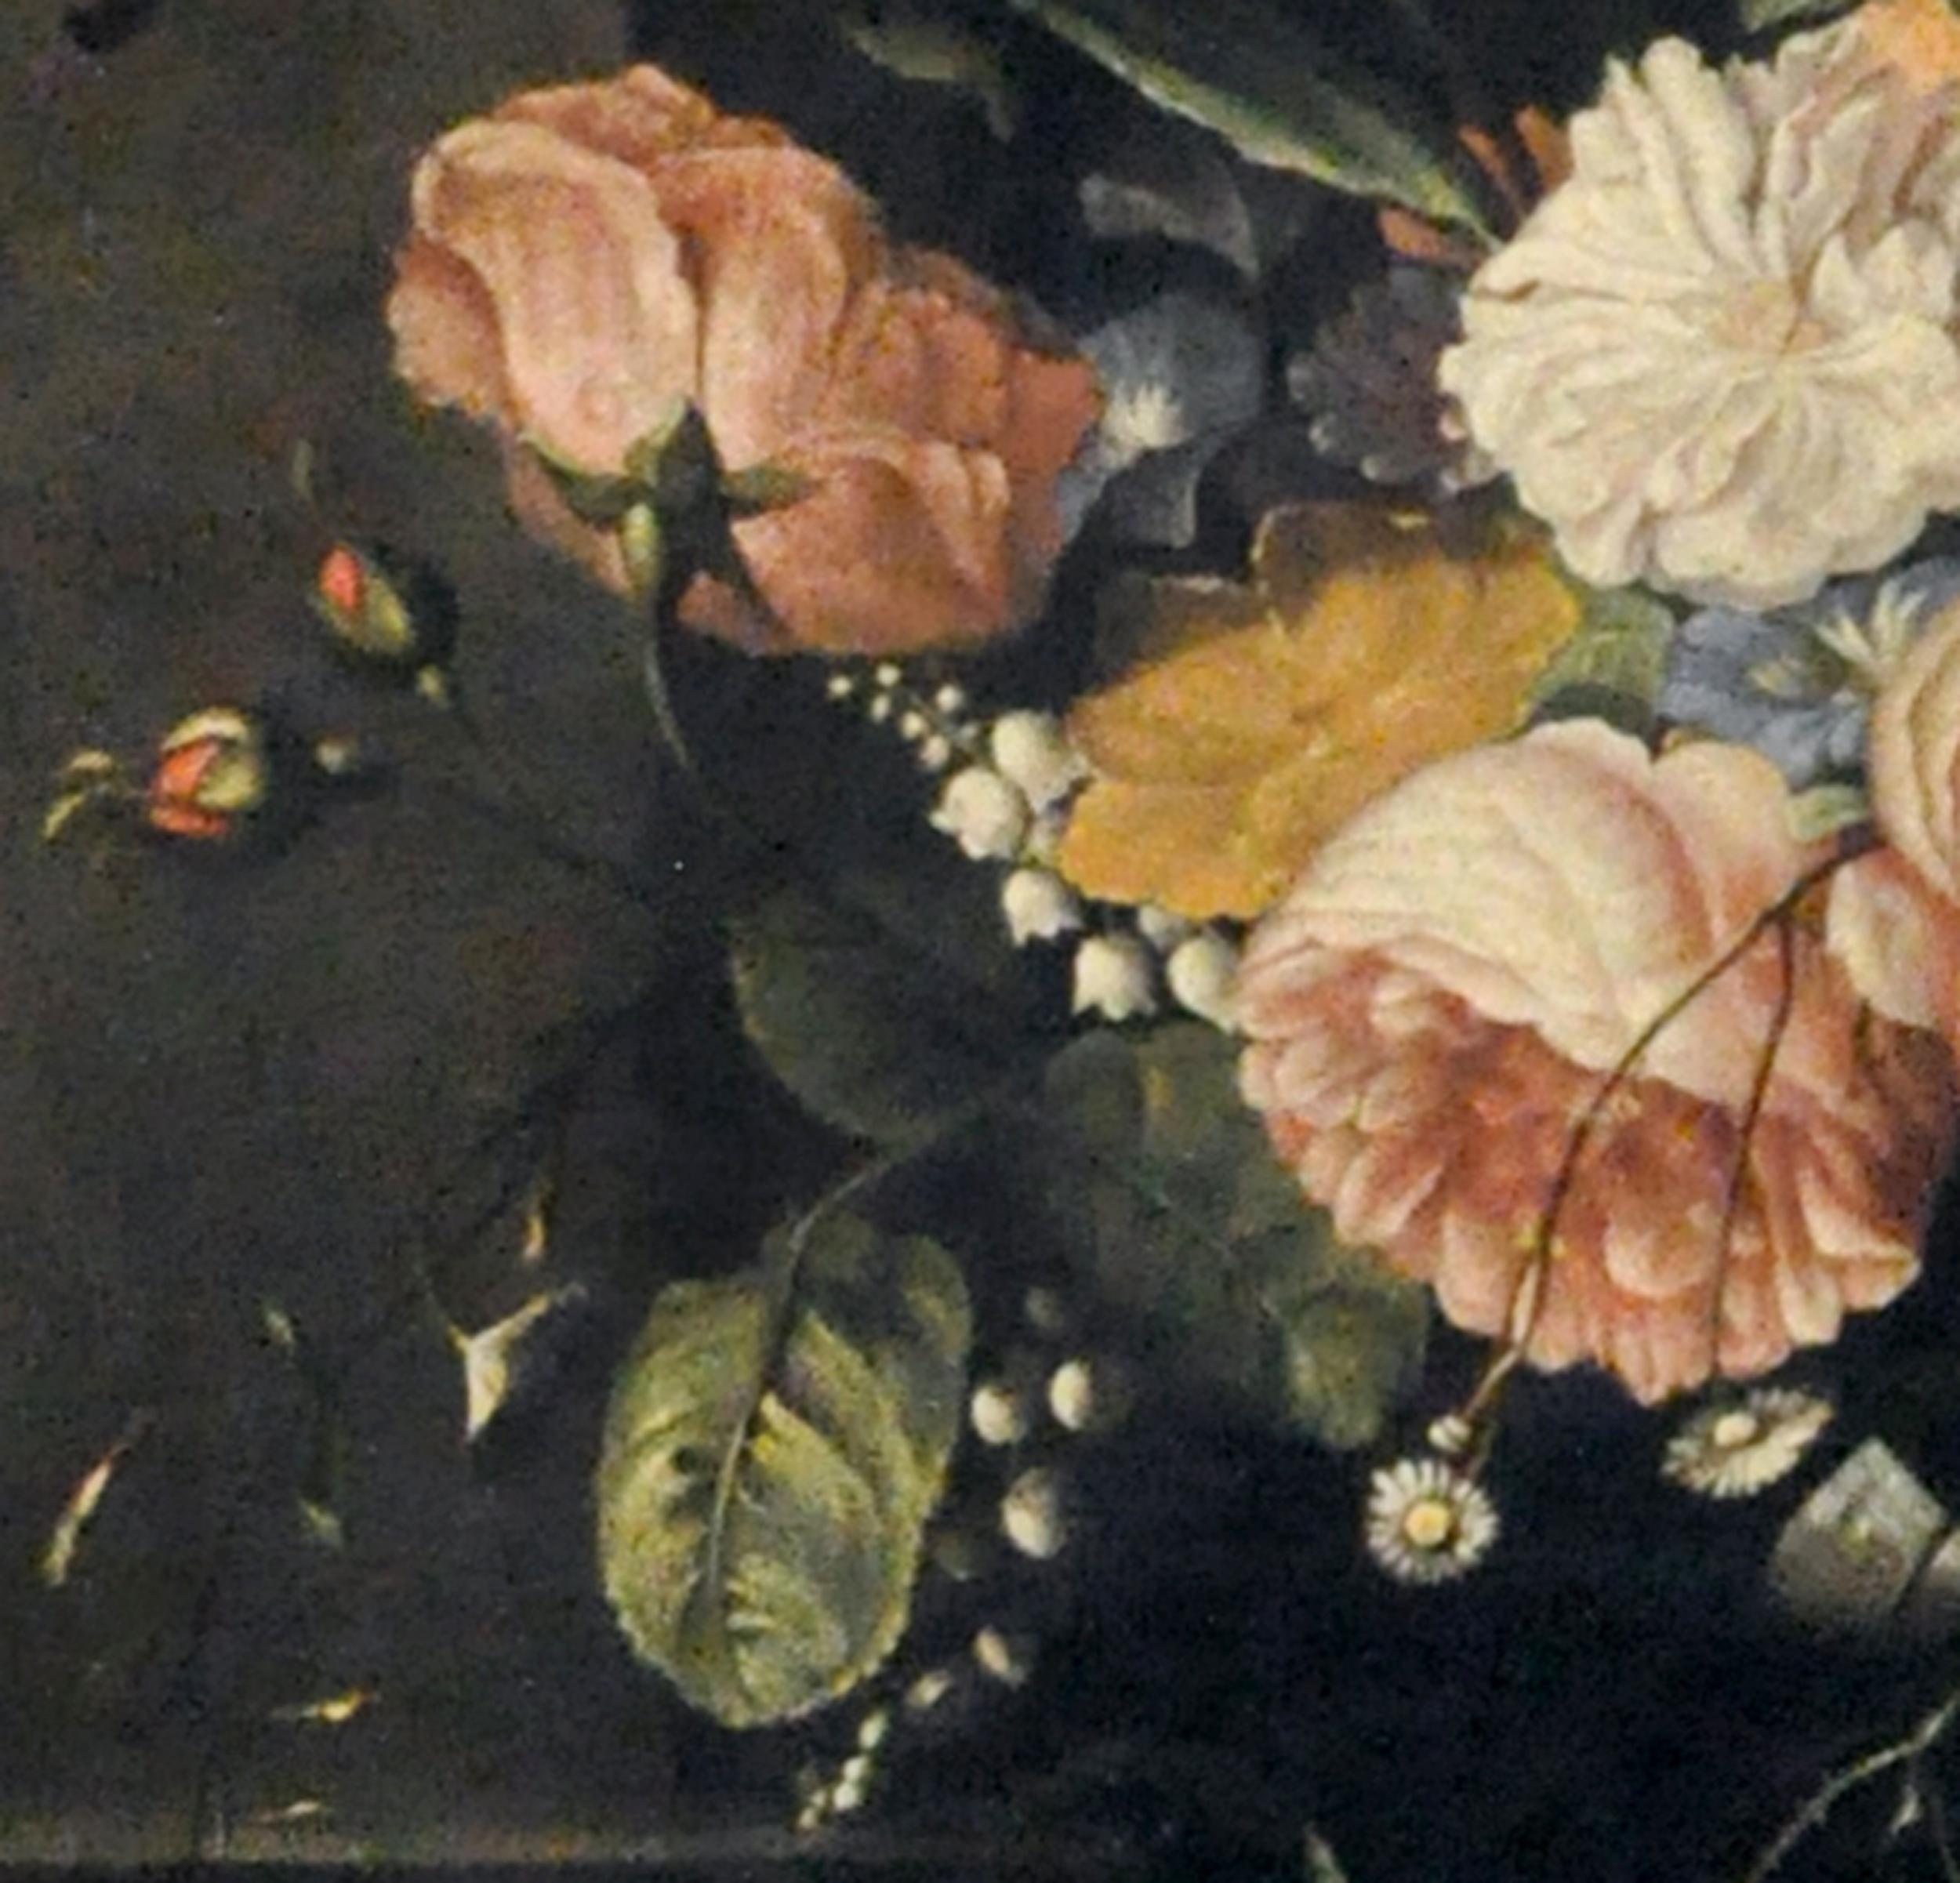 FLOWERS-In the Manner of Jacob van Wascapelle -Italian Still Life Oil on Canvas  - Black Still-Life Painting by Gianluca D'Este